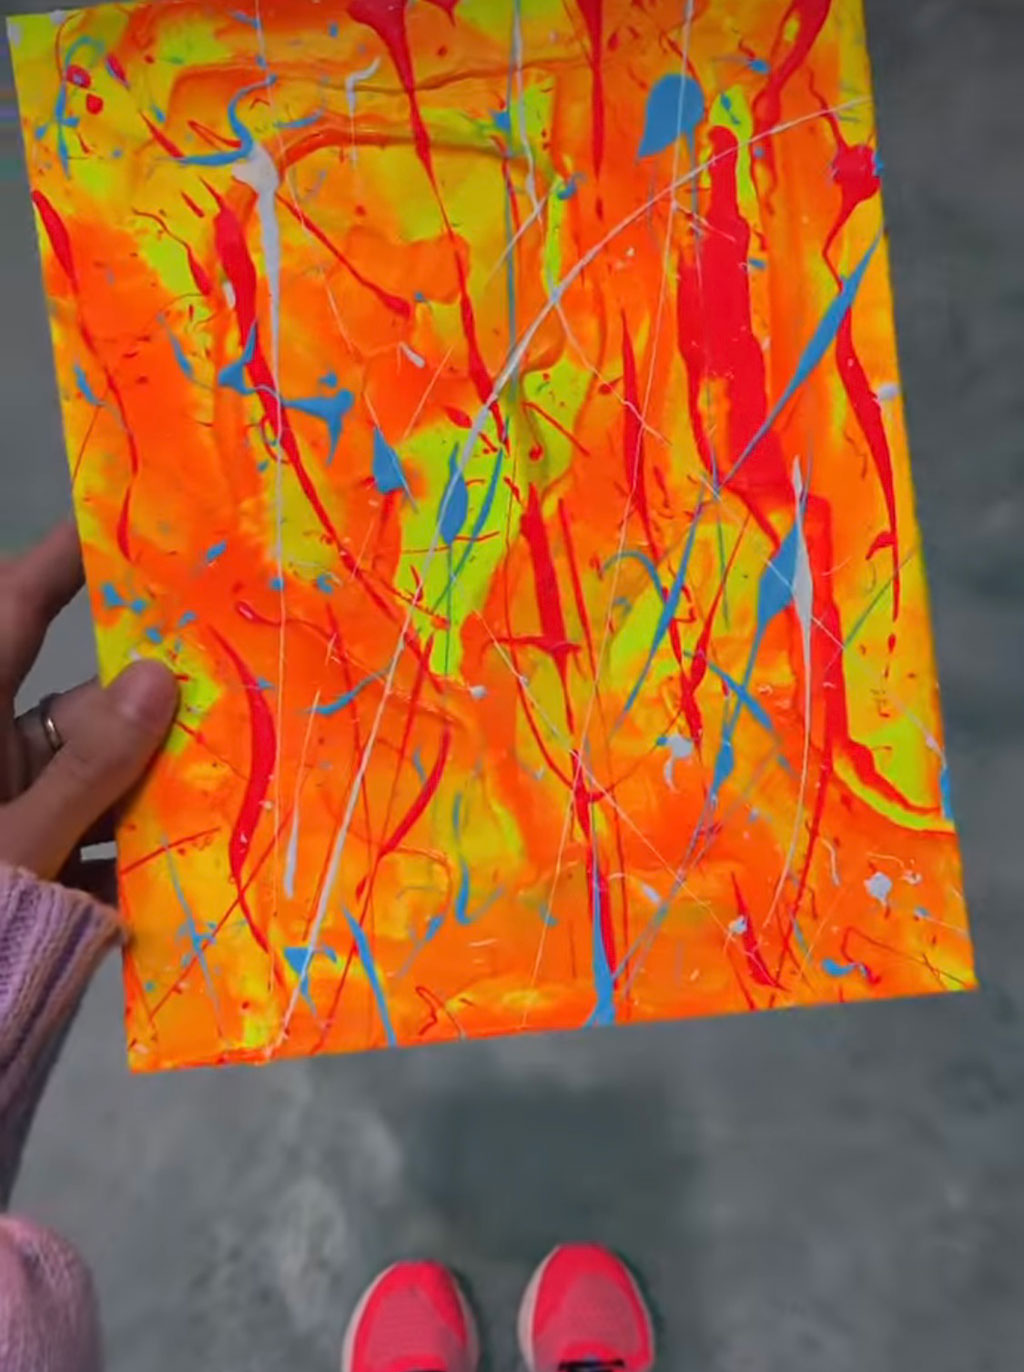 Bridget Bradley, Abstract Artist holds her original painting on paper, 'Fire' a colourful textured abstraction of fire.